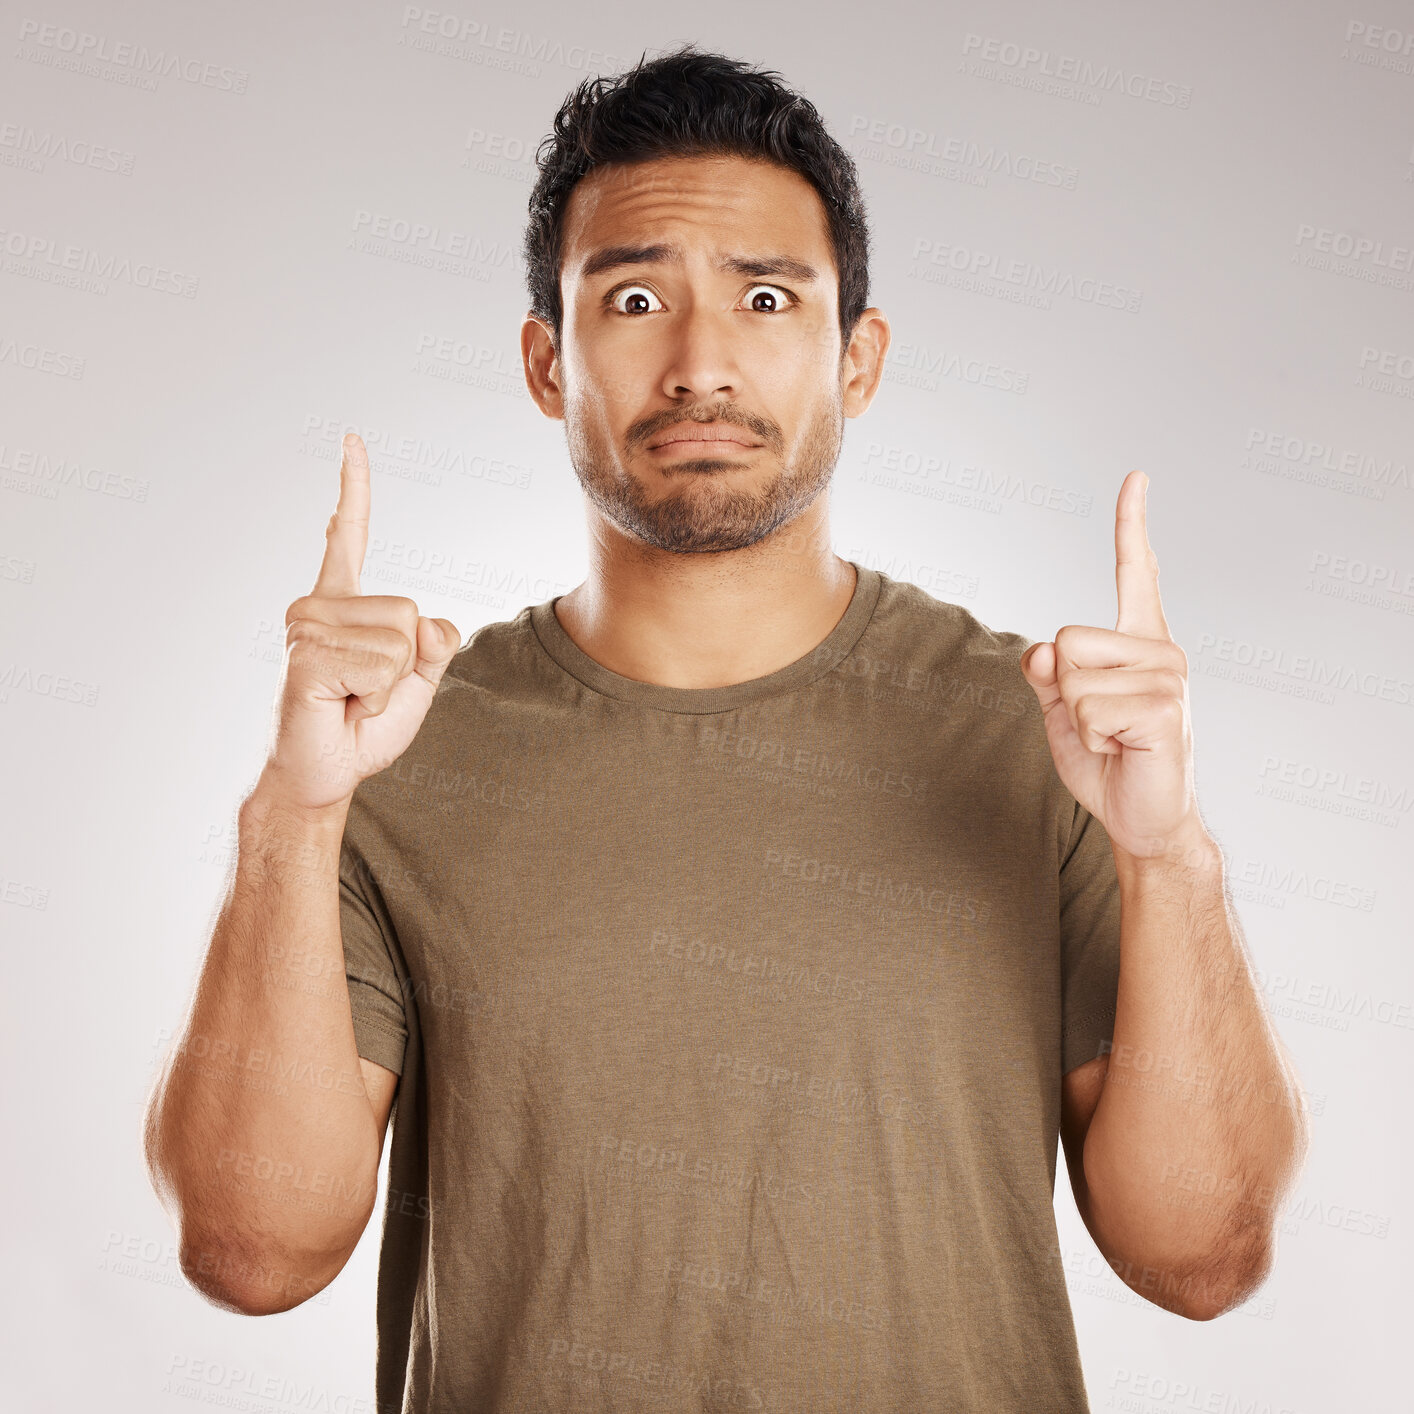 Buy stock photo Handsome young mixed race man pointing towards copyspace while standing in studio isolated against a grey background. Unsure hispanic male advertising or endorsing your product, company or idea